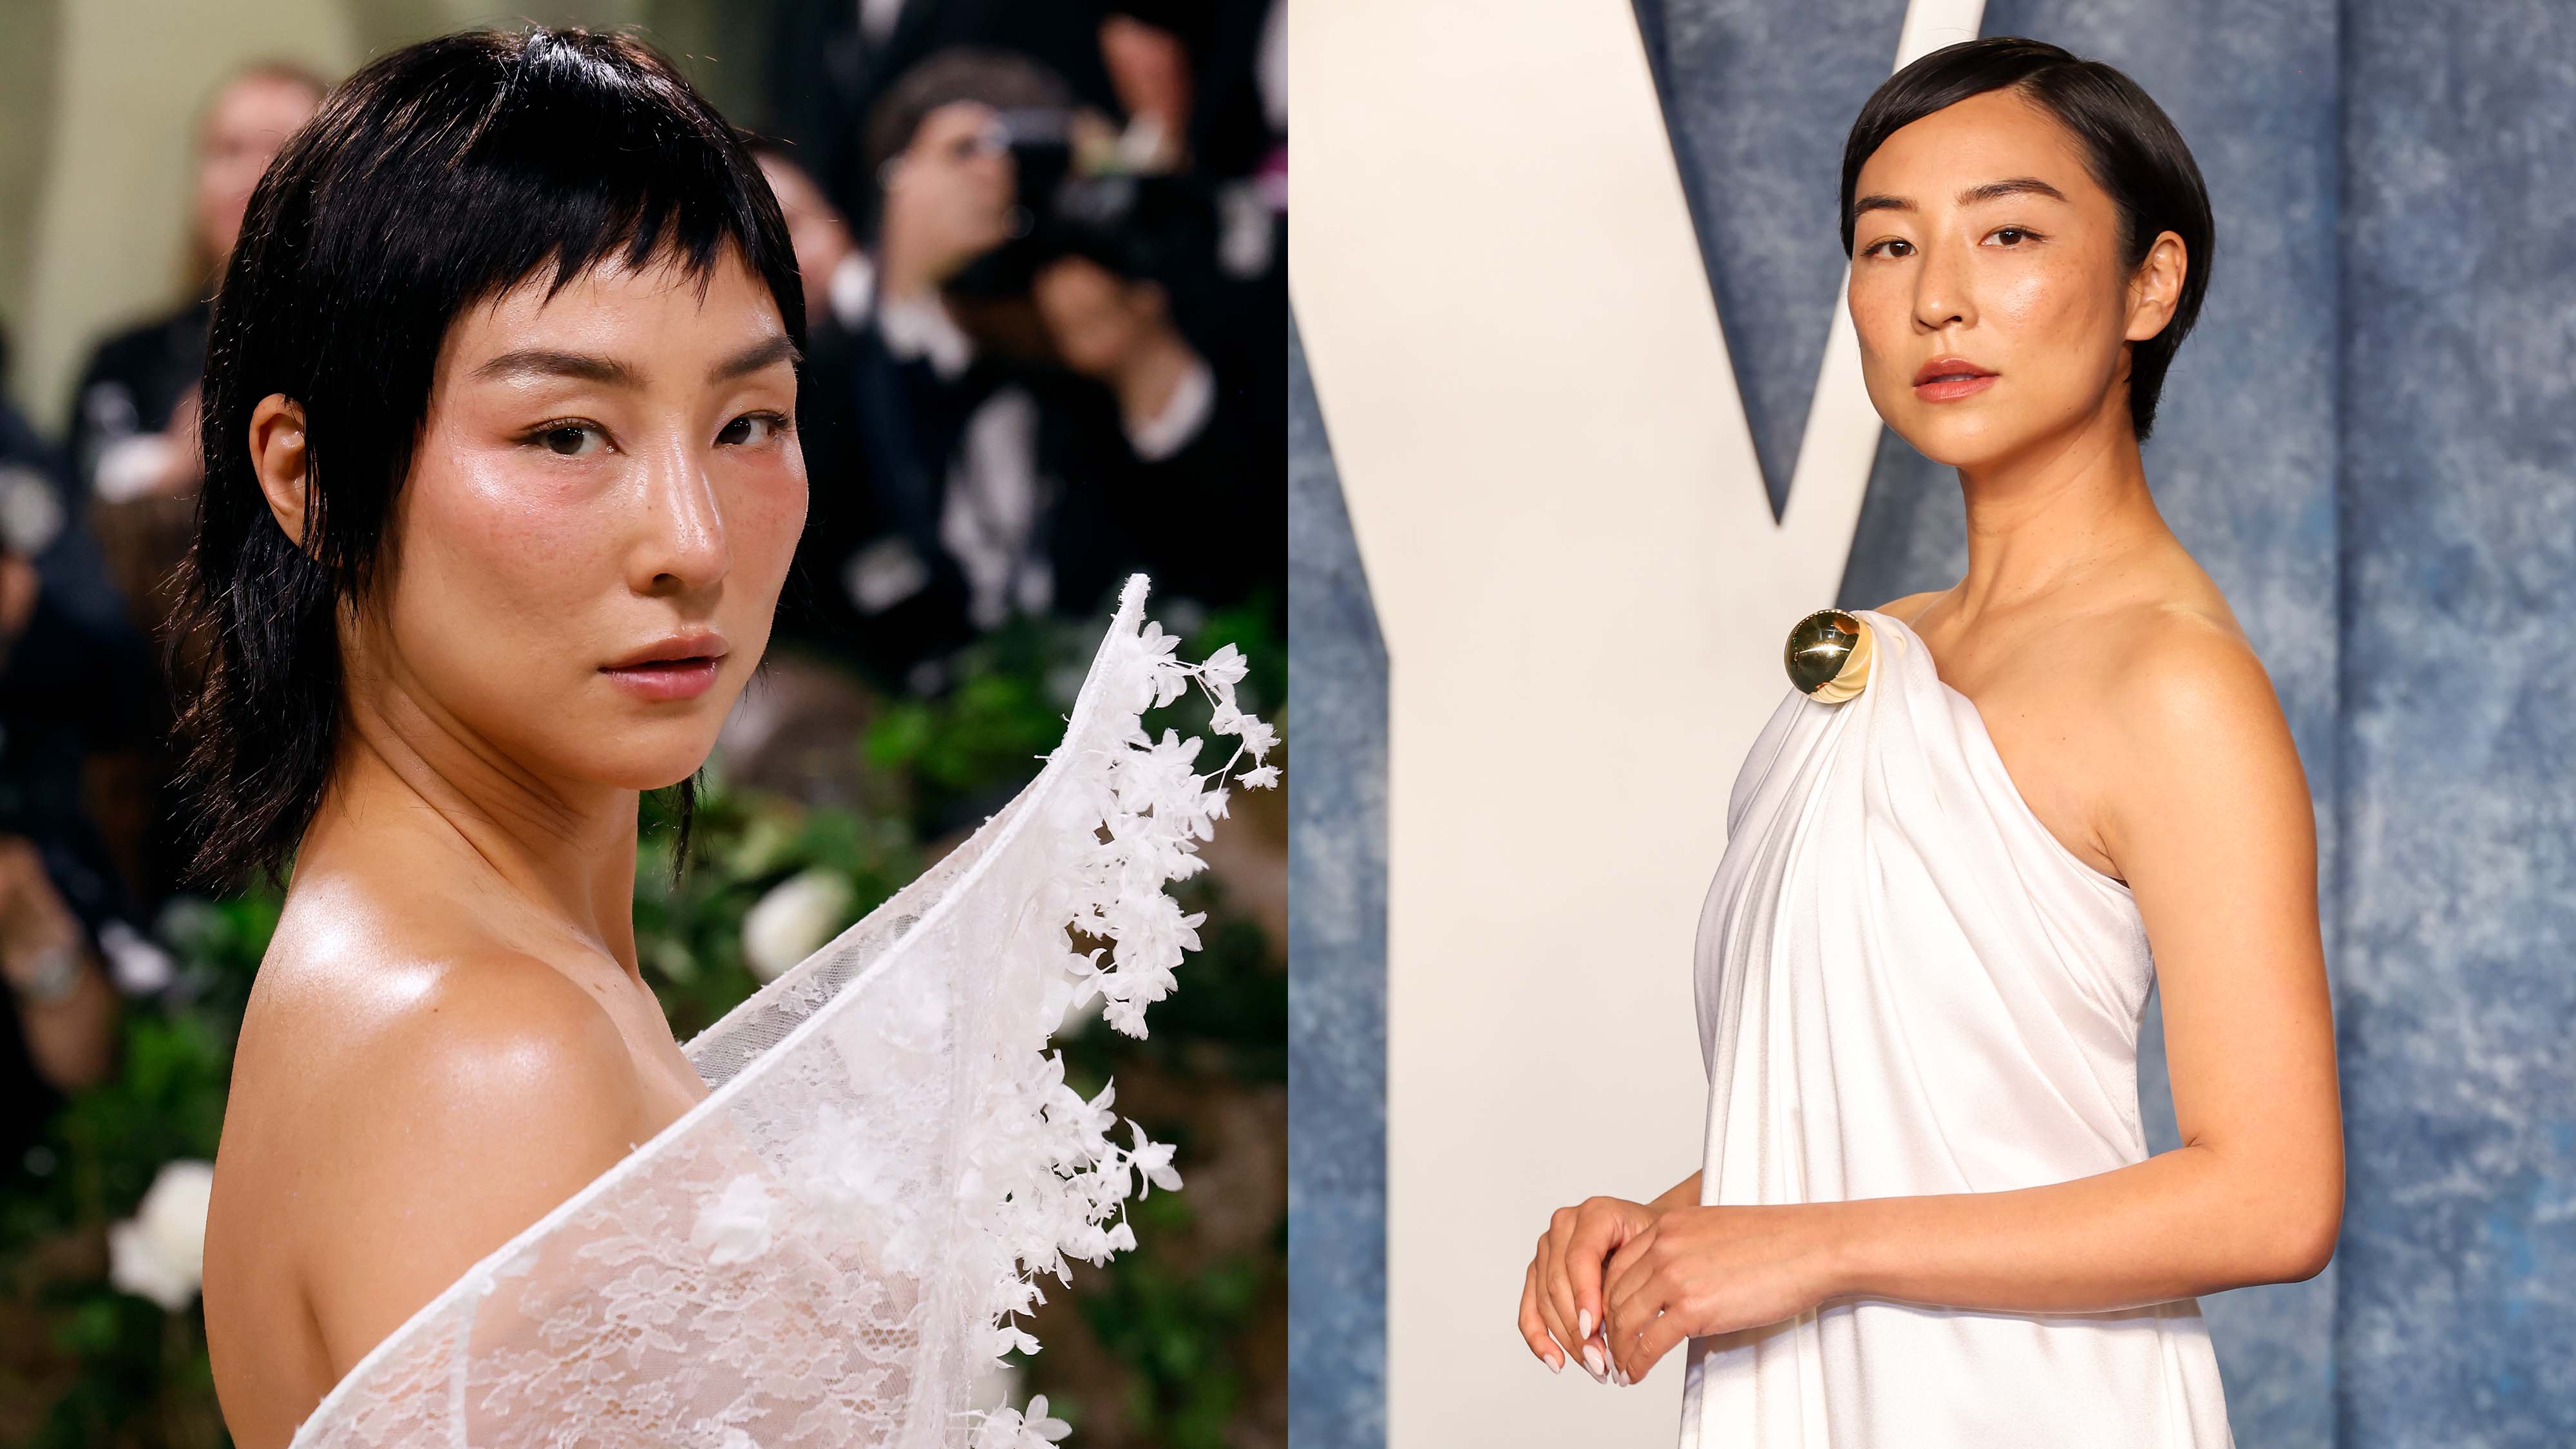 Every Iconic Beauty Look Greta Lee Has Worn on the Red Carpet